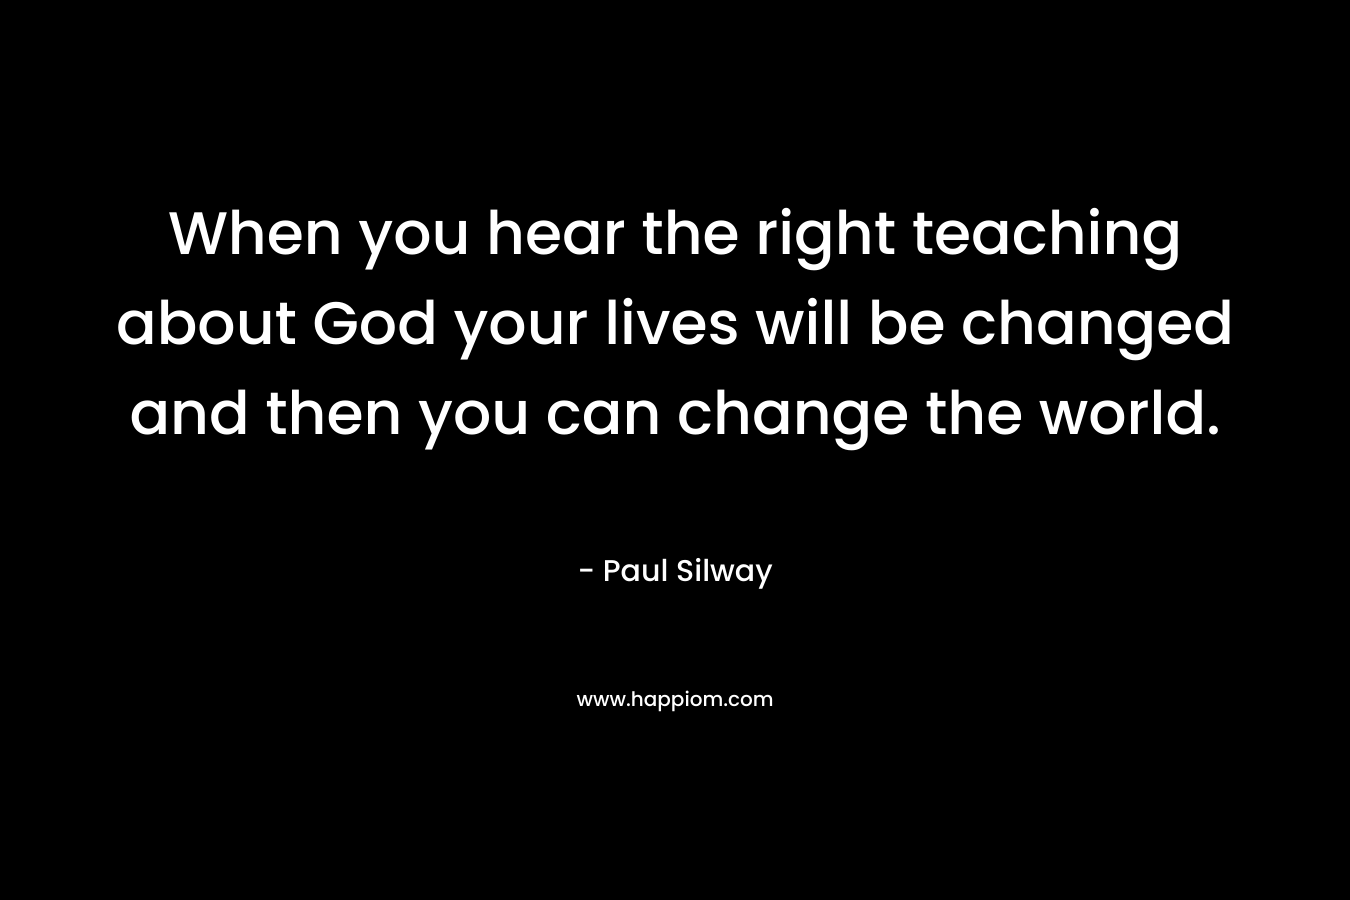 When you hear the right teaching about God your lives will be changed and then you can change the world. – Paul Silway